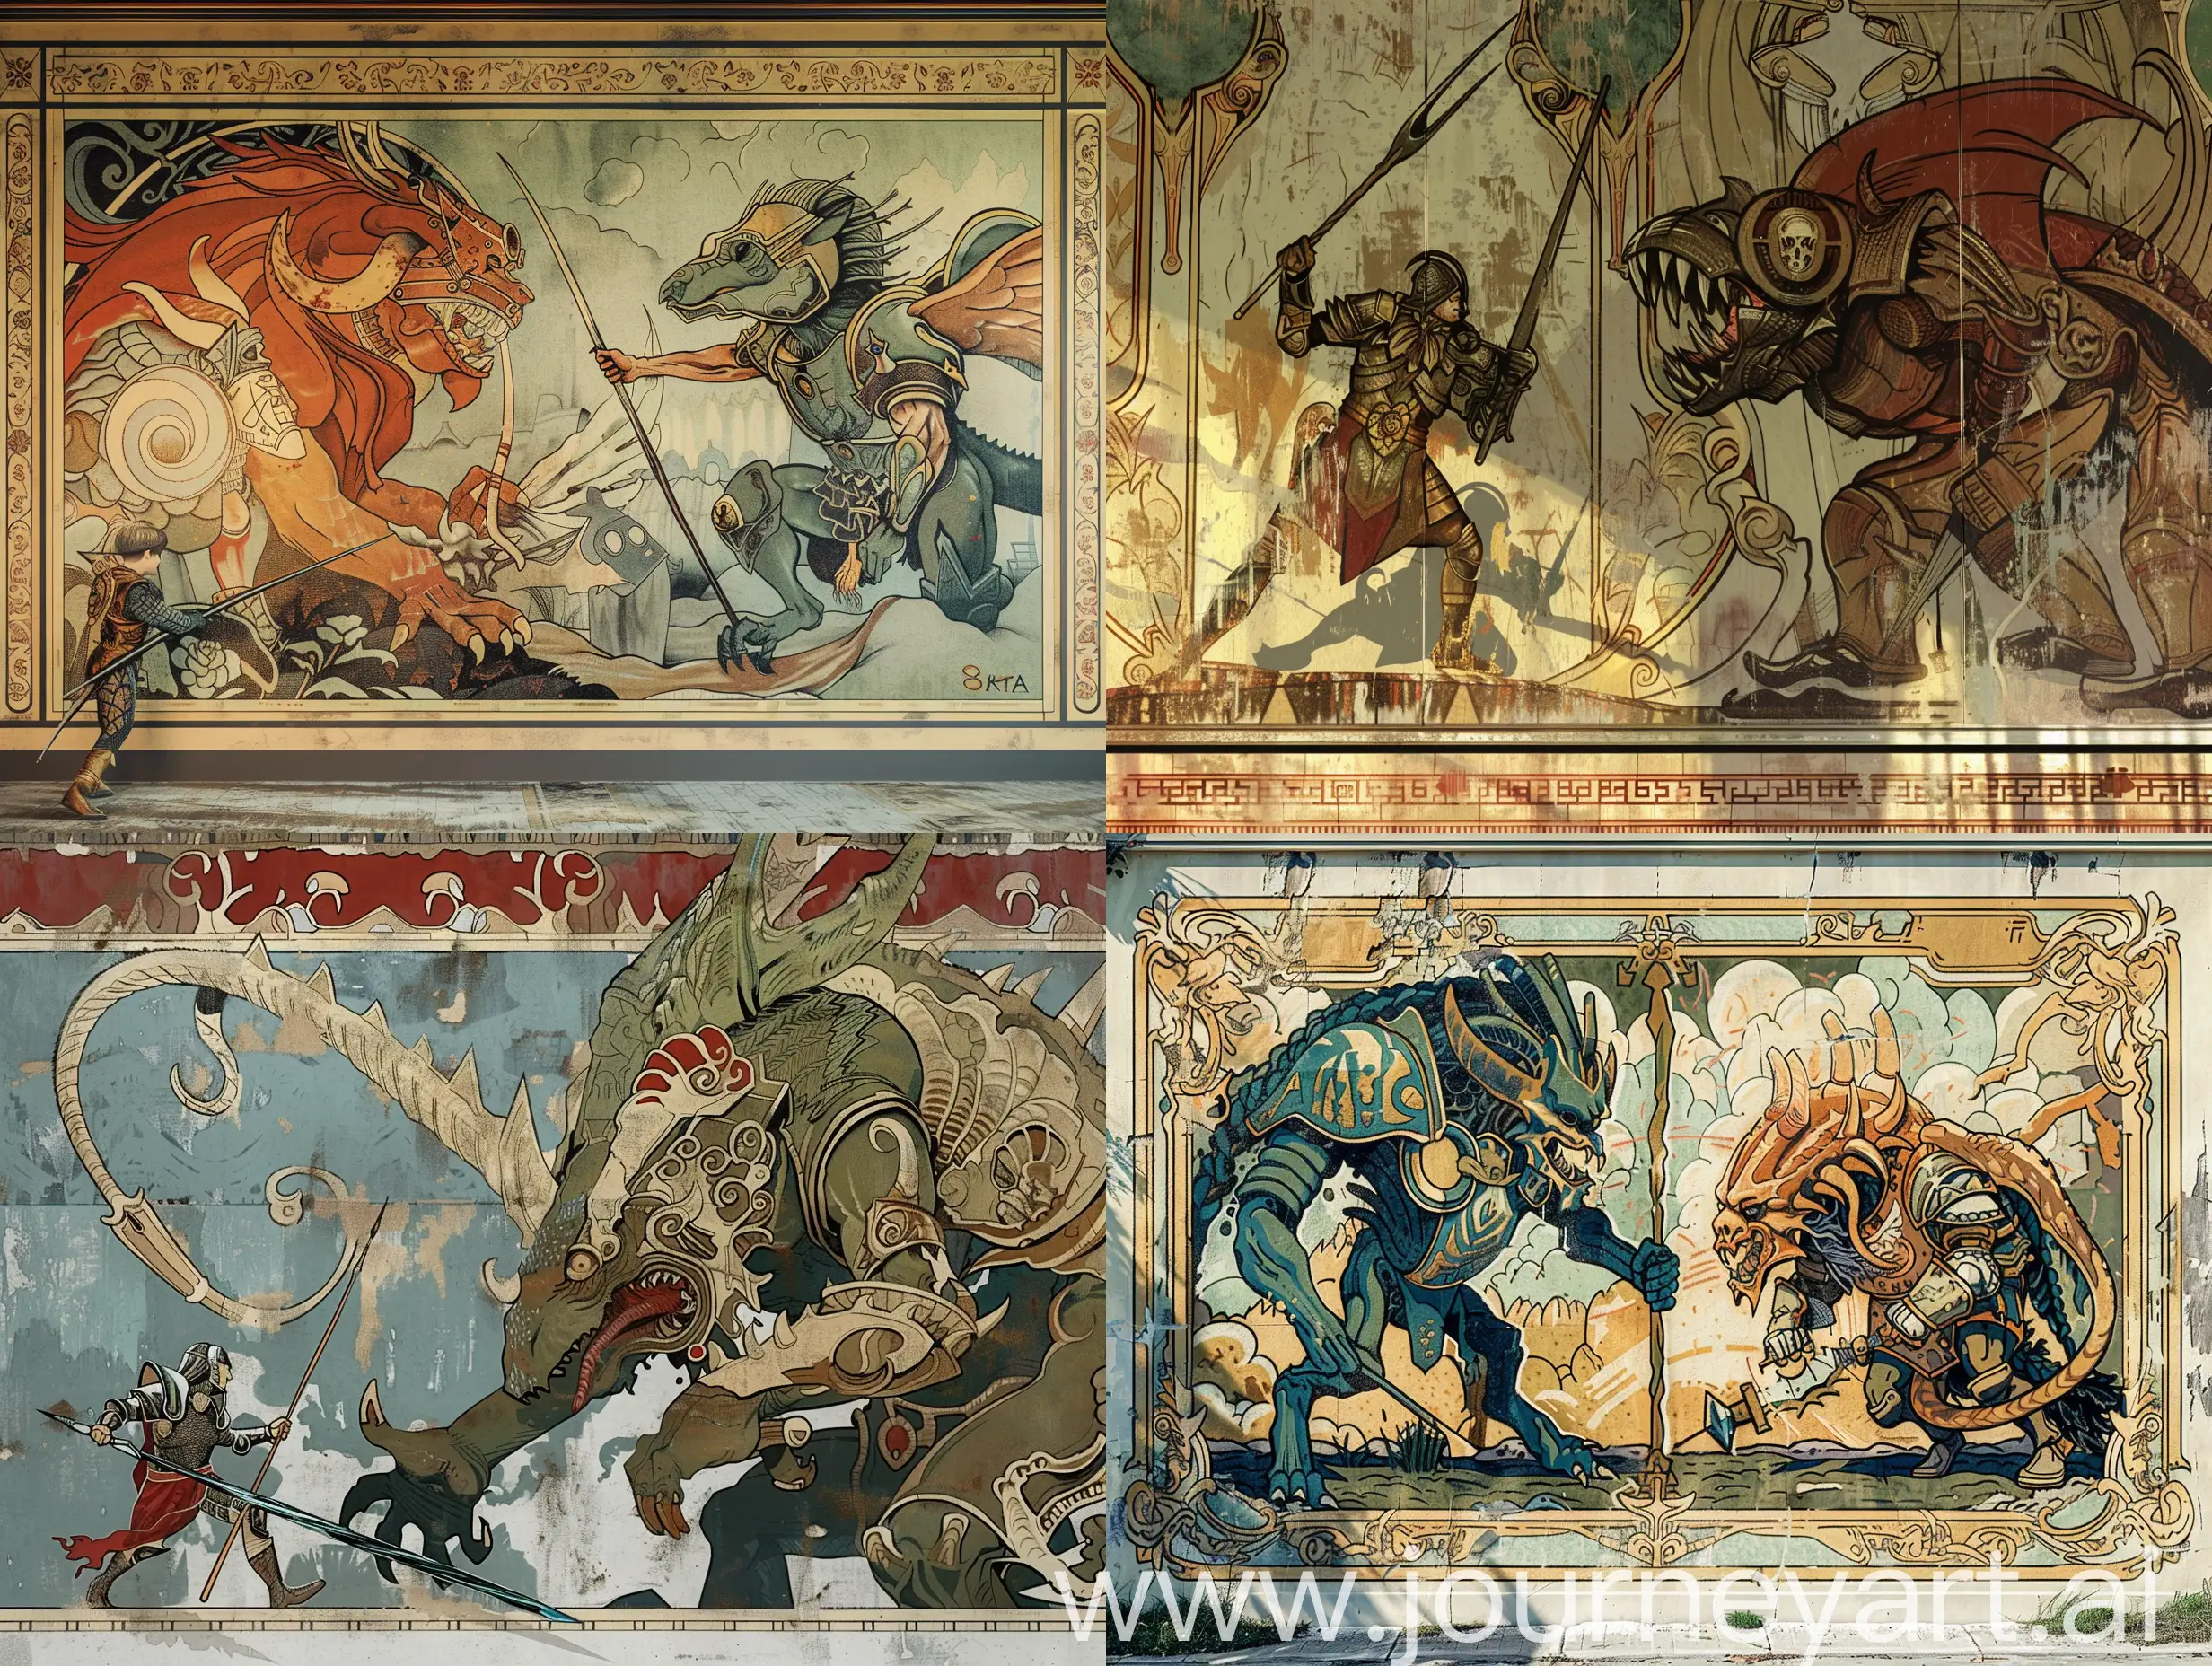 Epic-Battle-Mural-Majestic-Warrior-Confronts-Terrifying-TwoHeaded-Monster